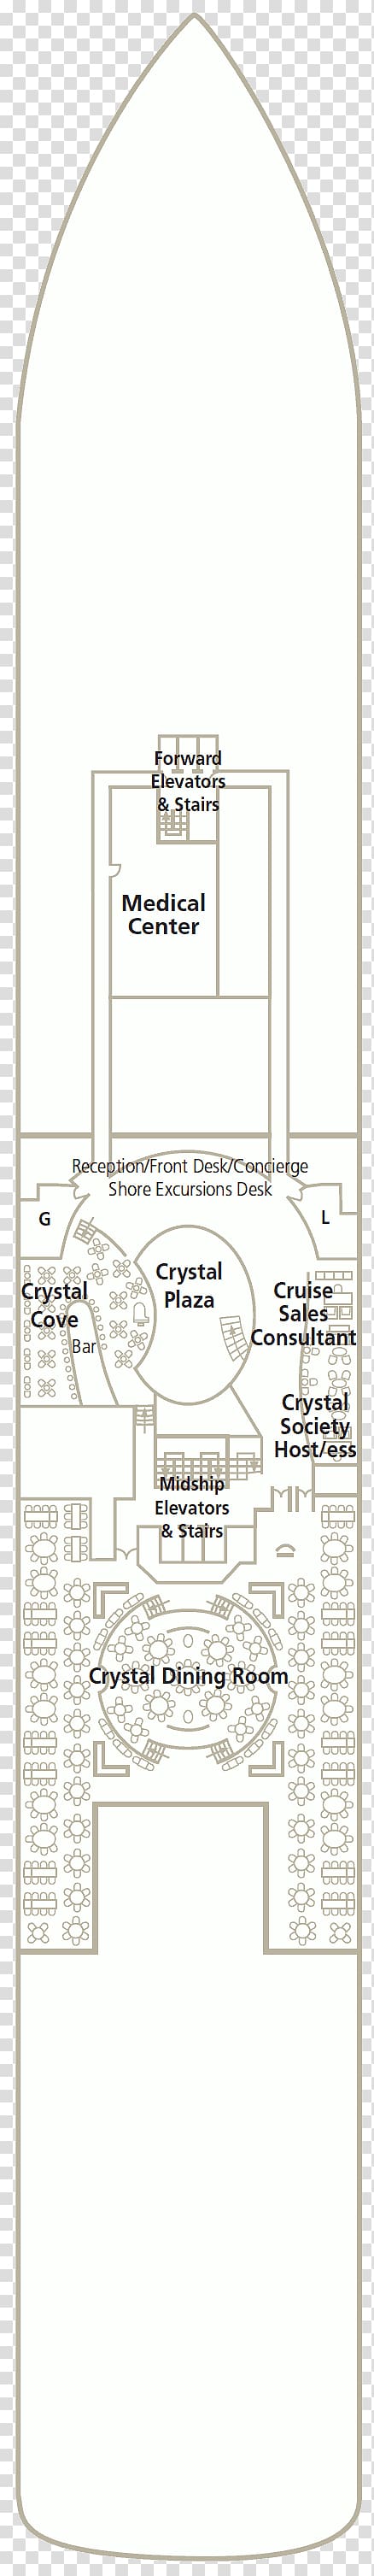 Crystal Serenity Cruise ship Deck Floor plan, hospital reception windows transparent background PNG clipart